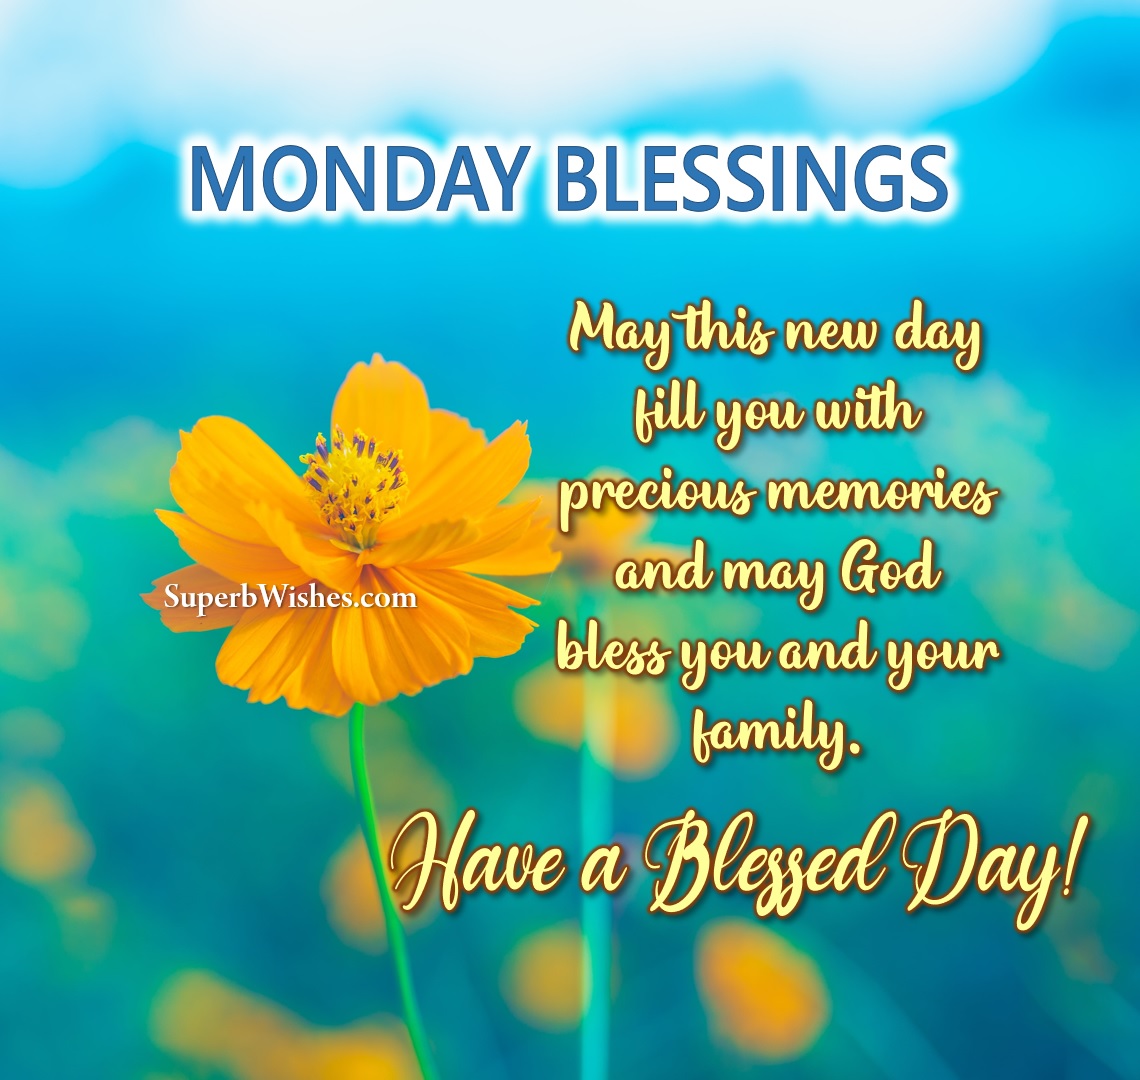 Have a Blessed Monday. Superbwishes.com